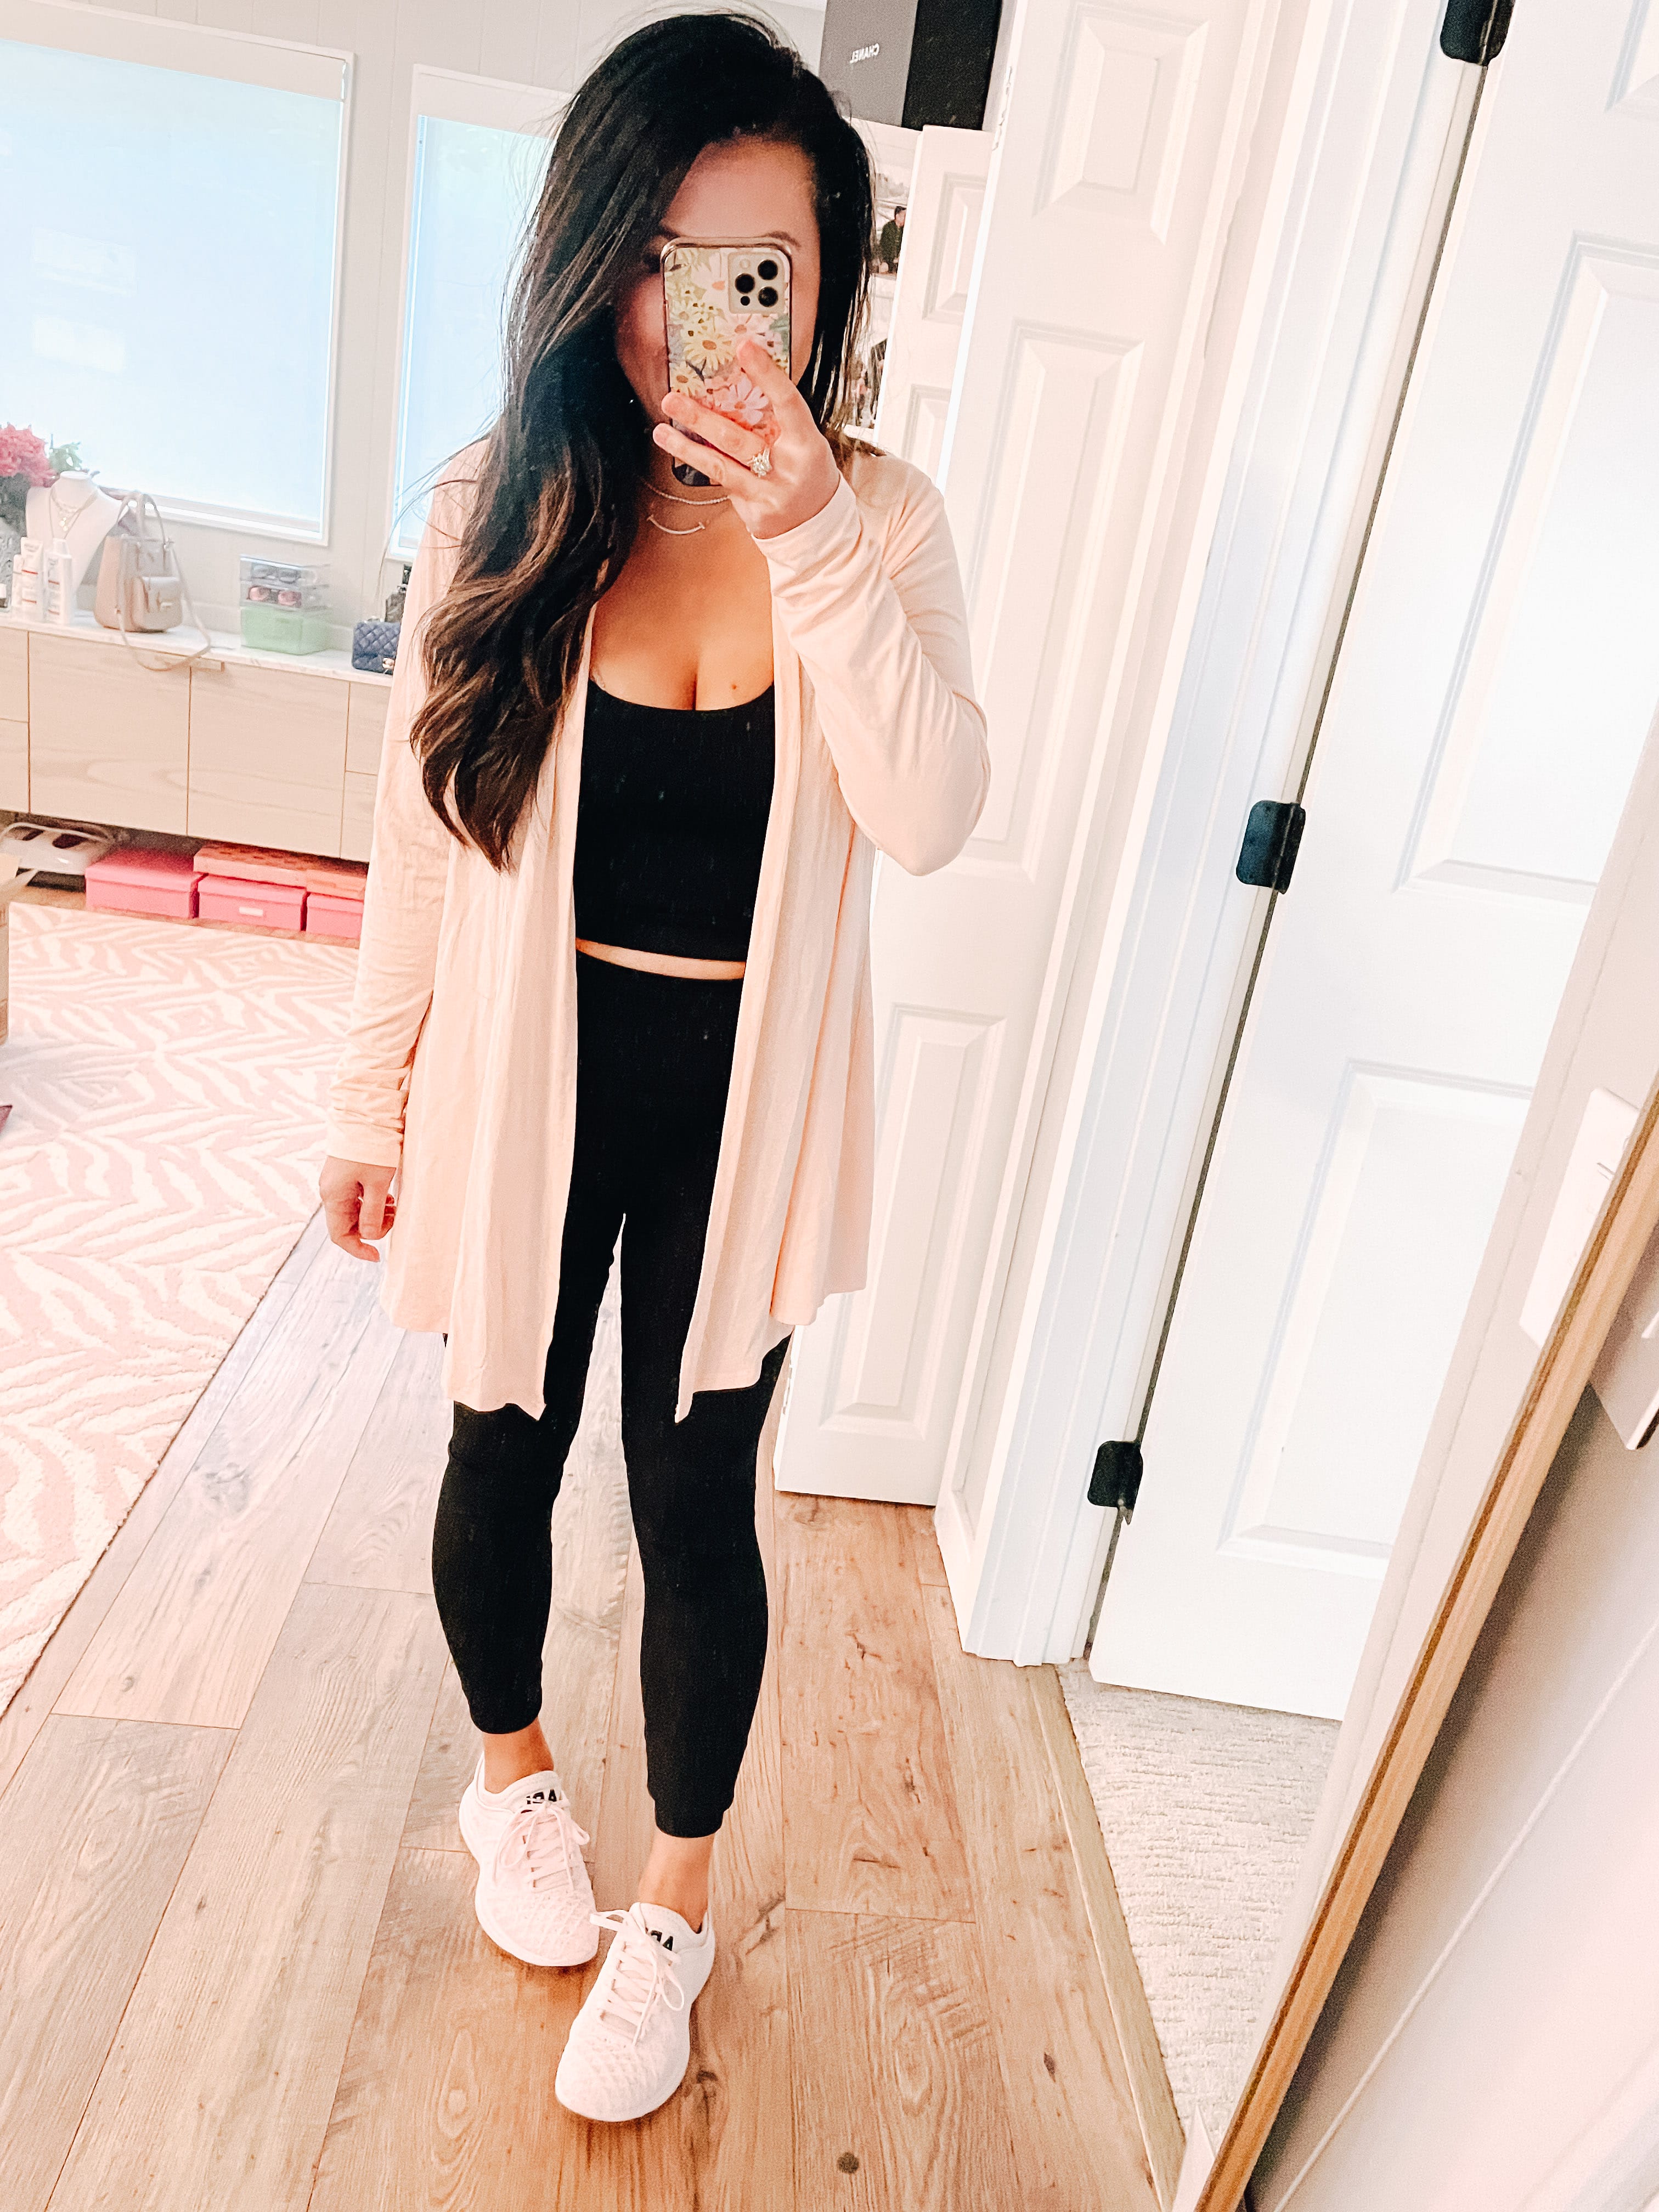 Black leggings summer outfit ideas on Stylevore